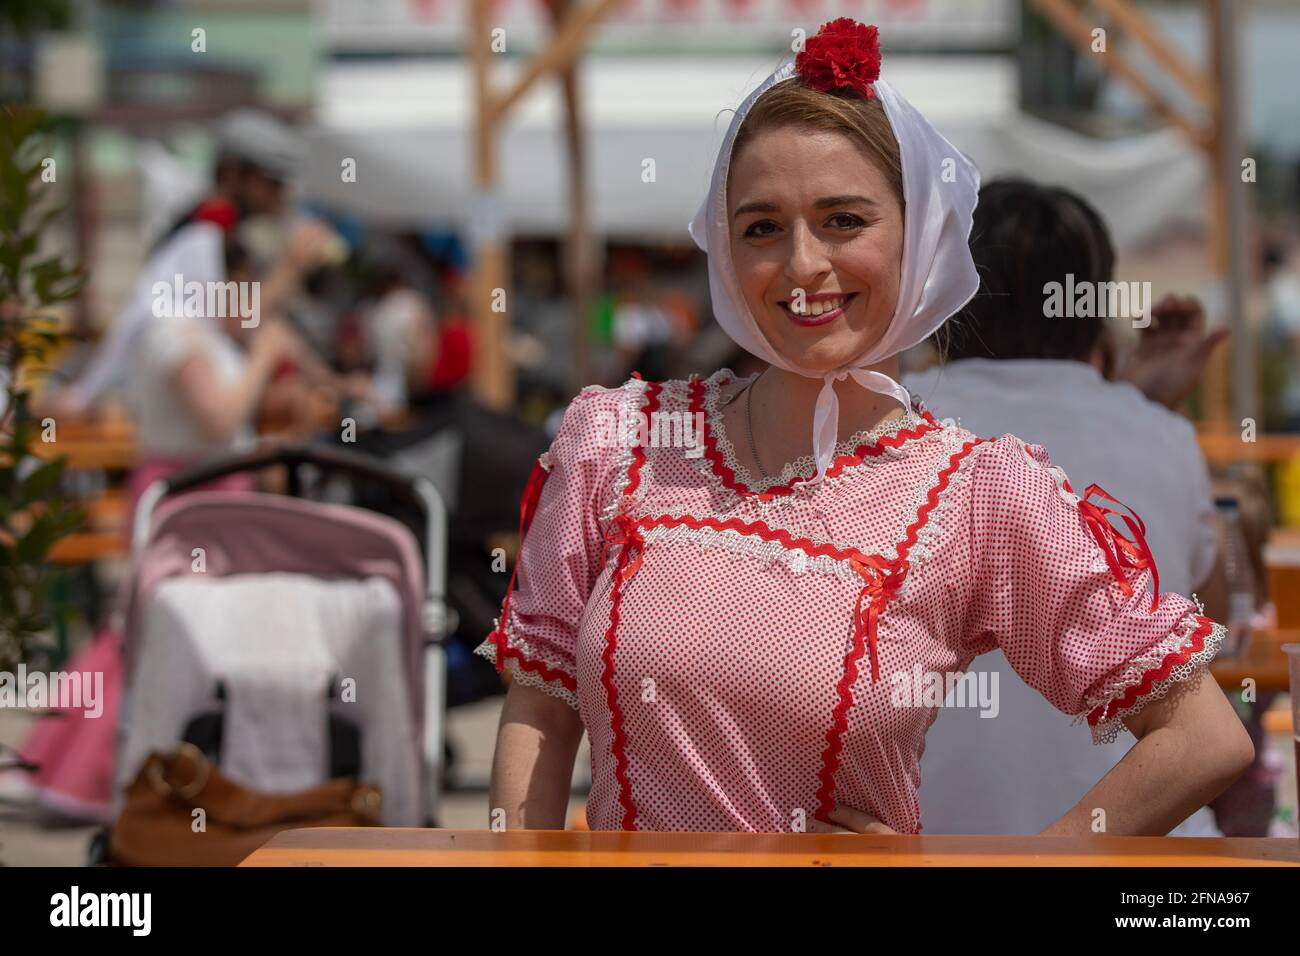 Madrid, Spain. 15th May, 2021. A woman dressed as a chulapa, poses for photos, during the San Isidro festivity in the IFEMA fairground.One of the most celebrated holidays of Madrid is the Feast Day of San Isidro which this year took place in the IFEMA fairground. (Photo by Guillermo Guterrez Carrascal/SOPA Images/Sipa USA) Credit: Sipa USA/Alamy Live News Stock Photo